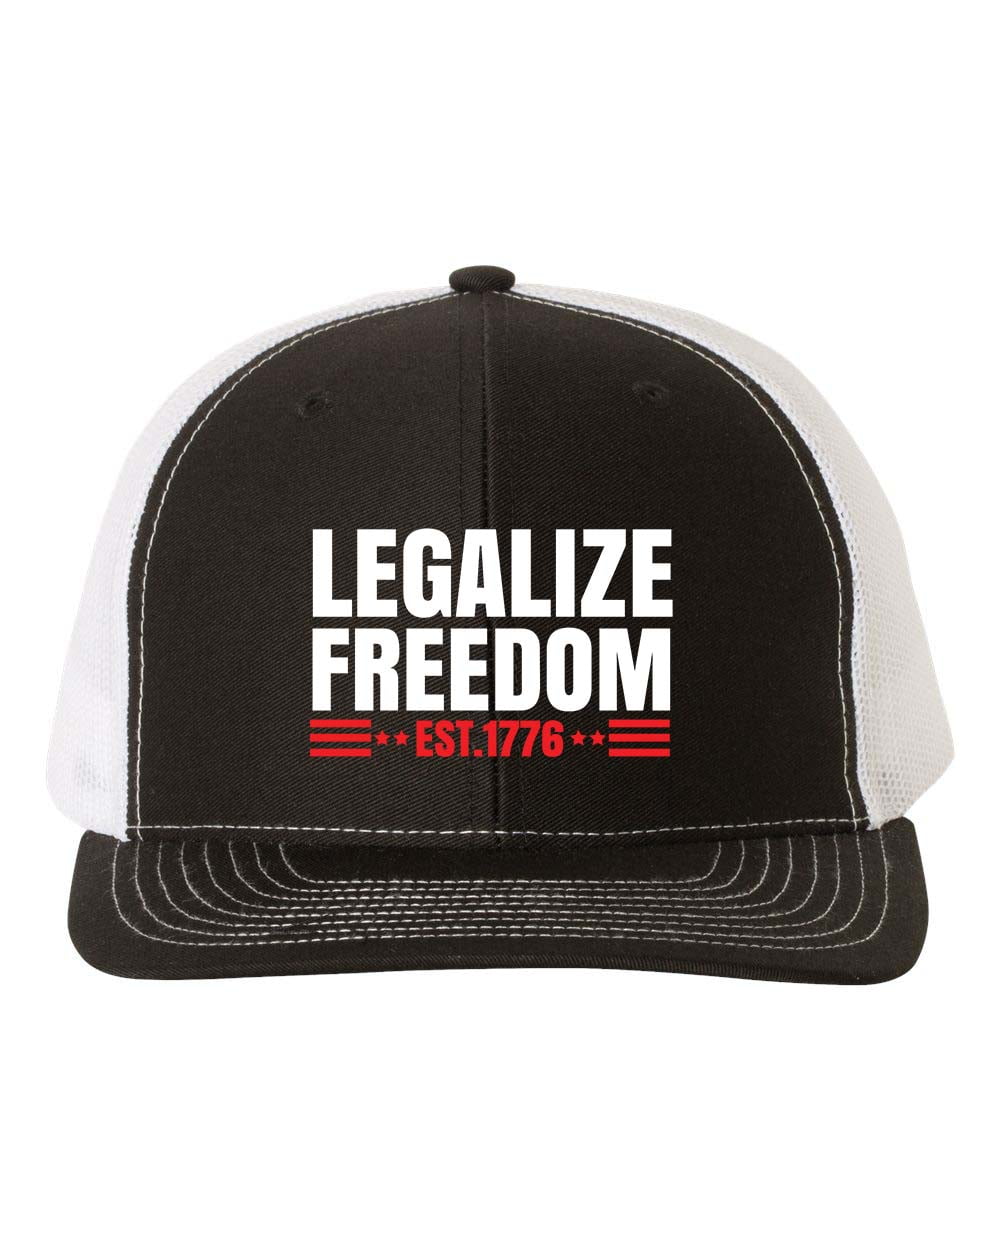 Heritage Pride Legalize Freedom Since 1776 Embroidered Mens Mesh Back Trucker